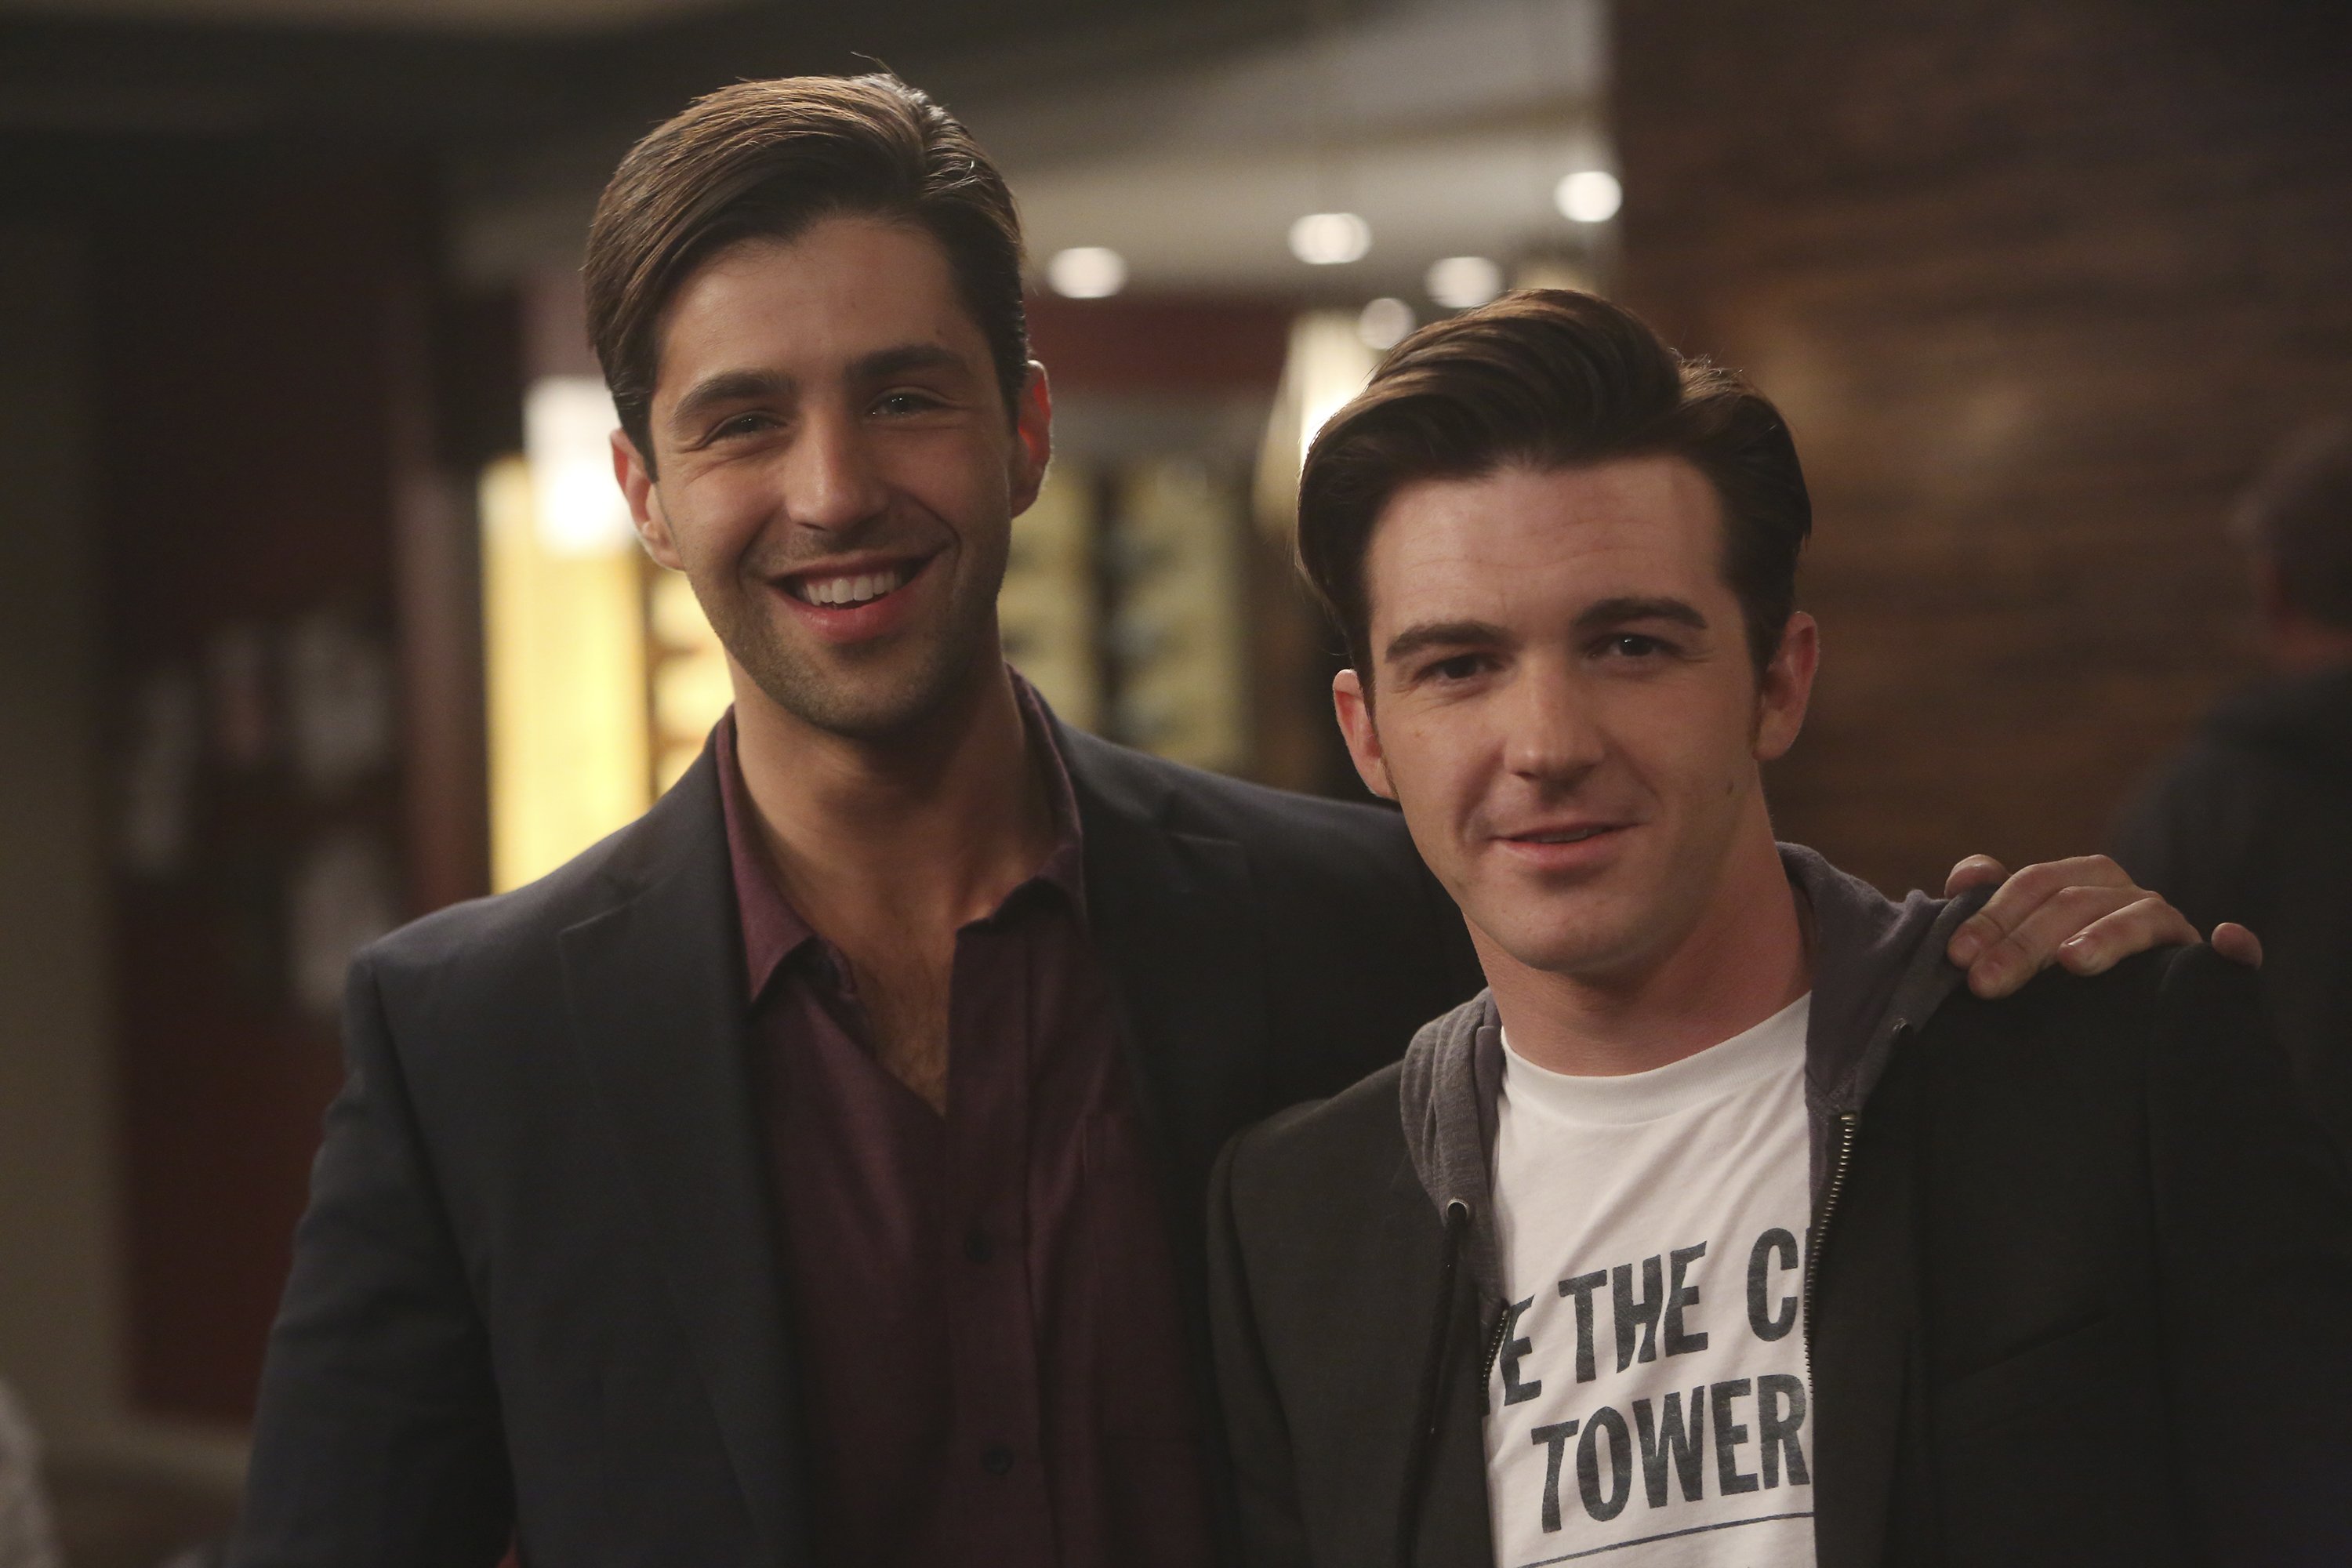 Drake Bell and Josh Peck on the set of "Grandfathered" - Season One - "The Biter" 2015 | Photo: GettyImages